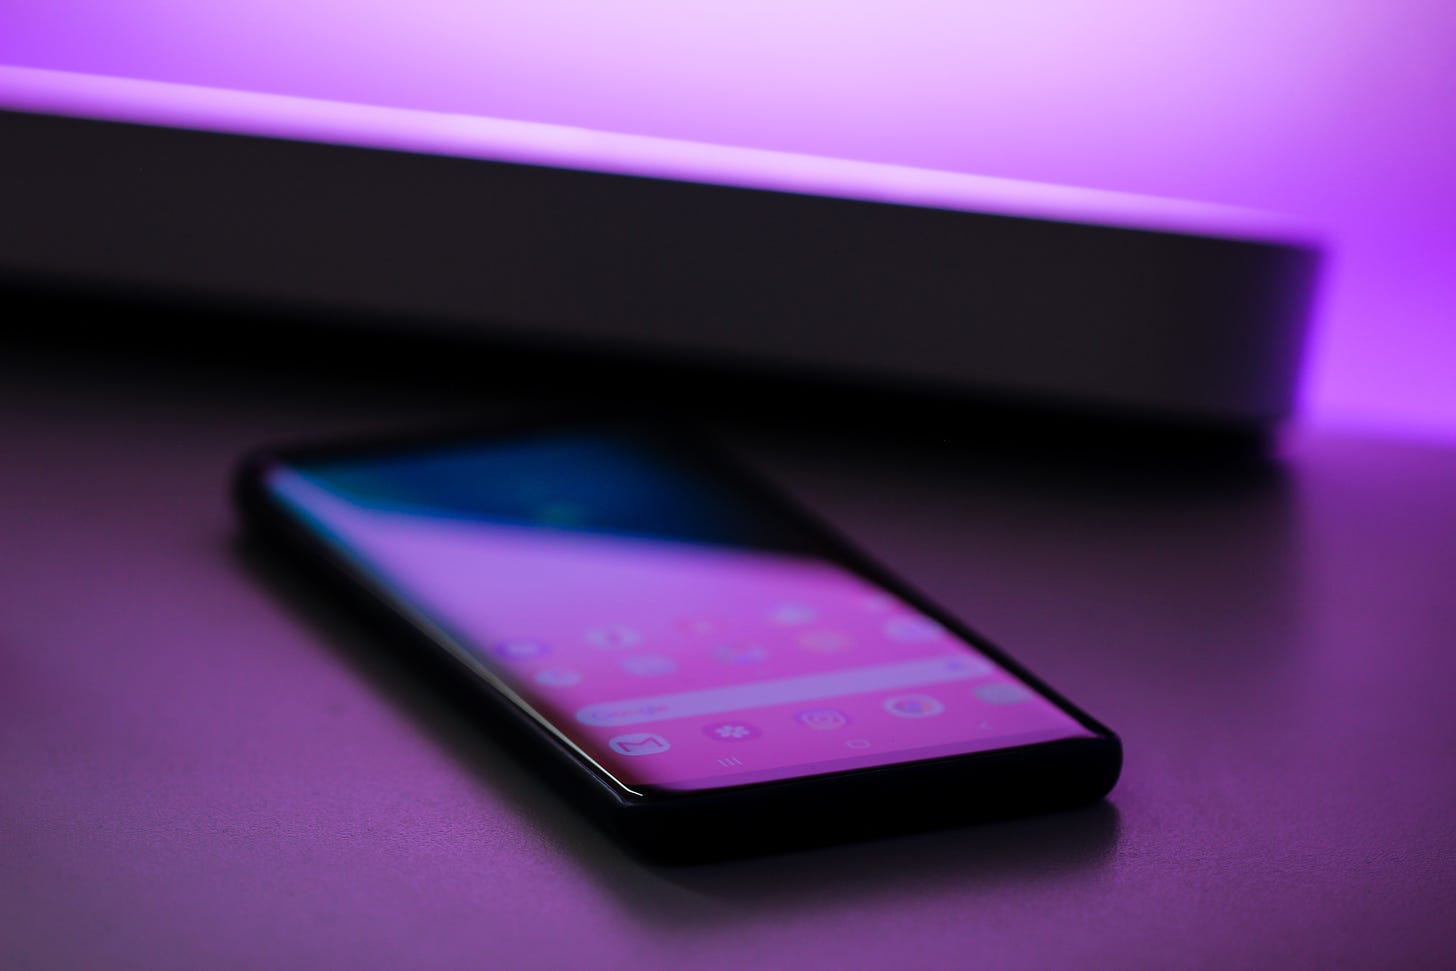 picture of a mobile phone on a surface awash with purple light